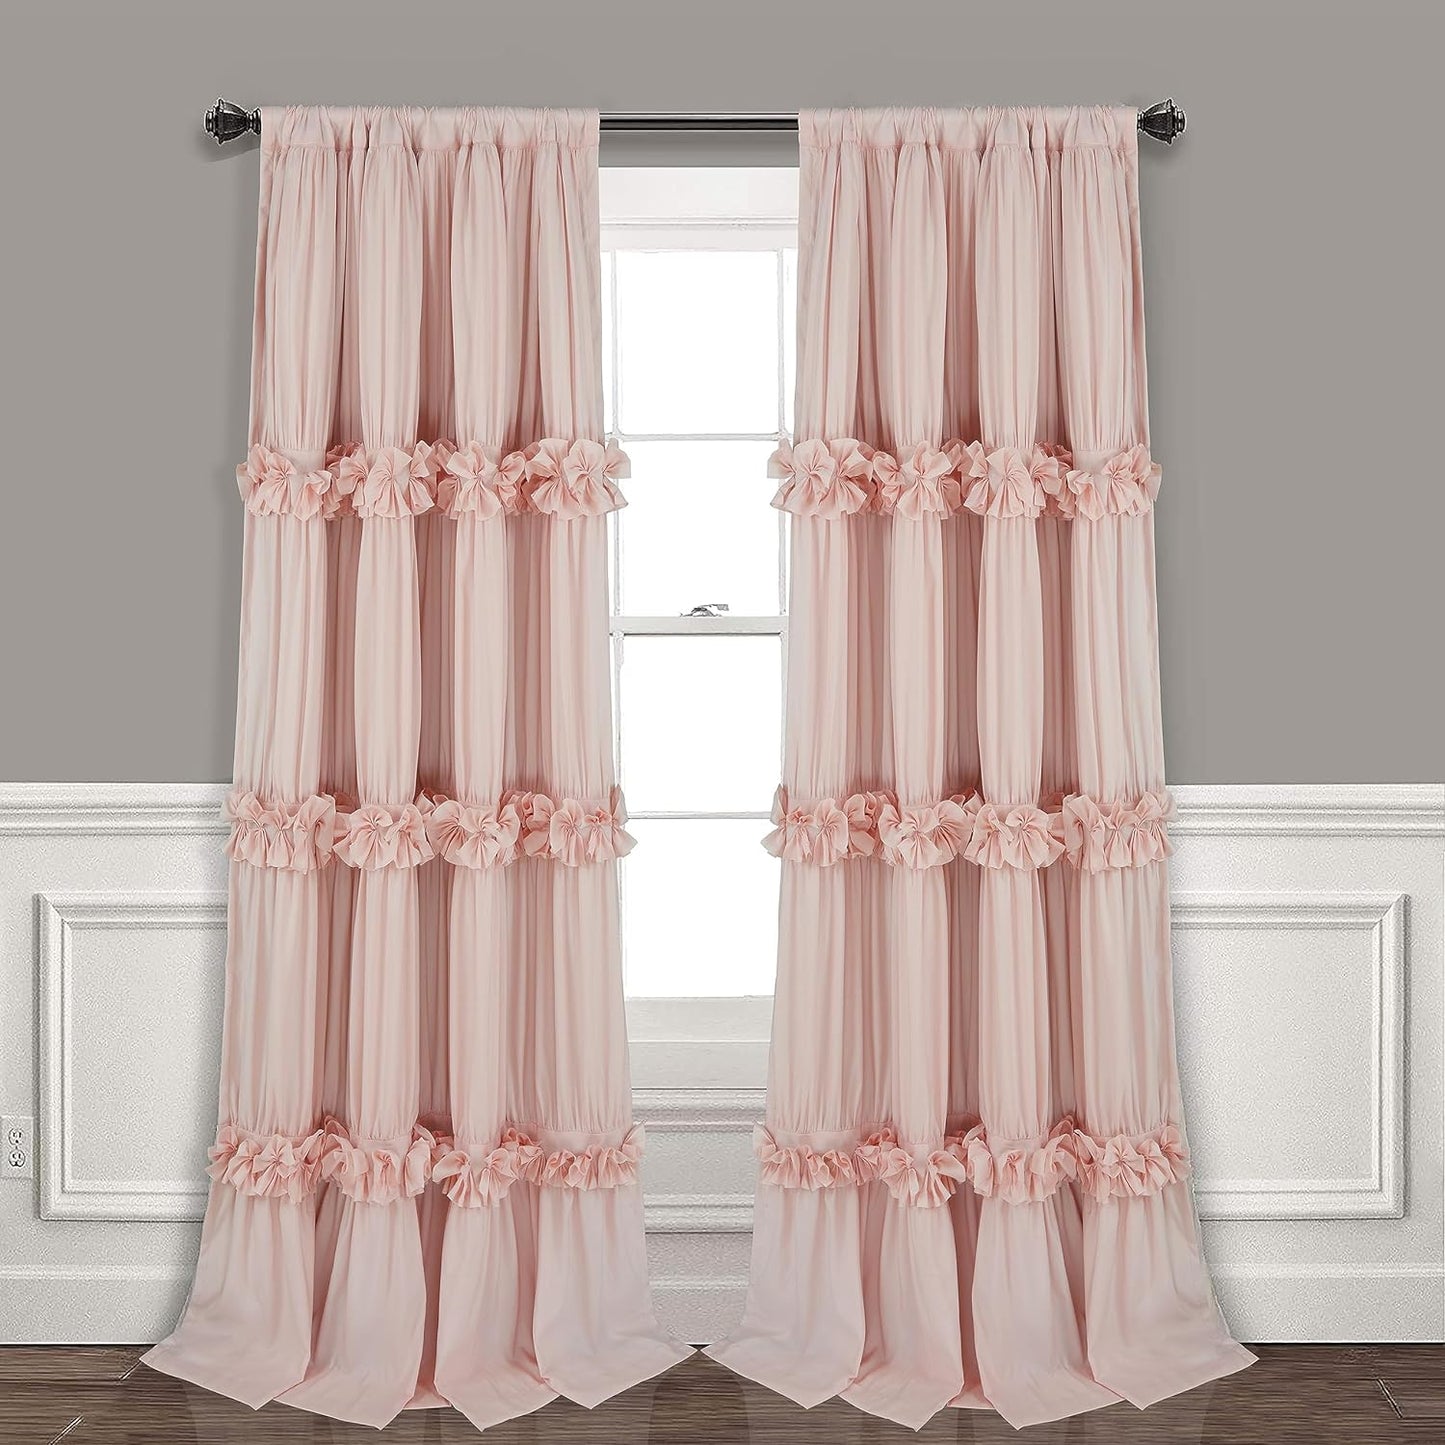 Homechoice Decor Thermal Insulated Blackout Window Curtains, 54" W X 84" L X 2 Panels, Boho Ruched Window Treatments with 3 Rows of Butterfly Flowers, Rustic Rod Pocket Drapes for Room, White (LQ-30)  Homechoice Decor Peach Pink 54" X 84" | 2 Panels 